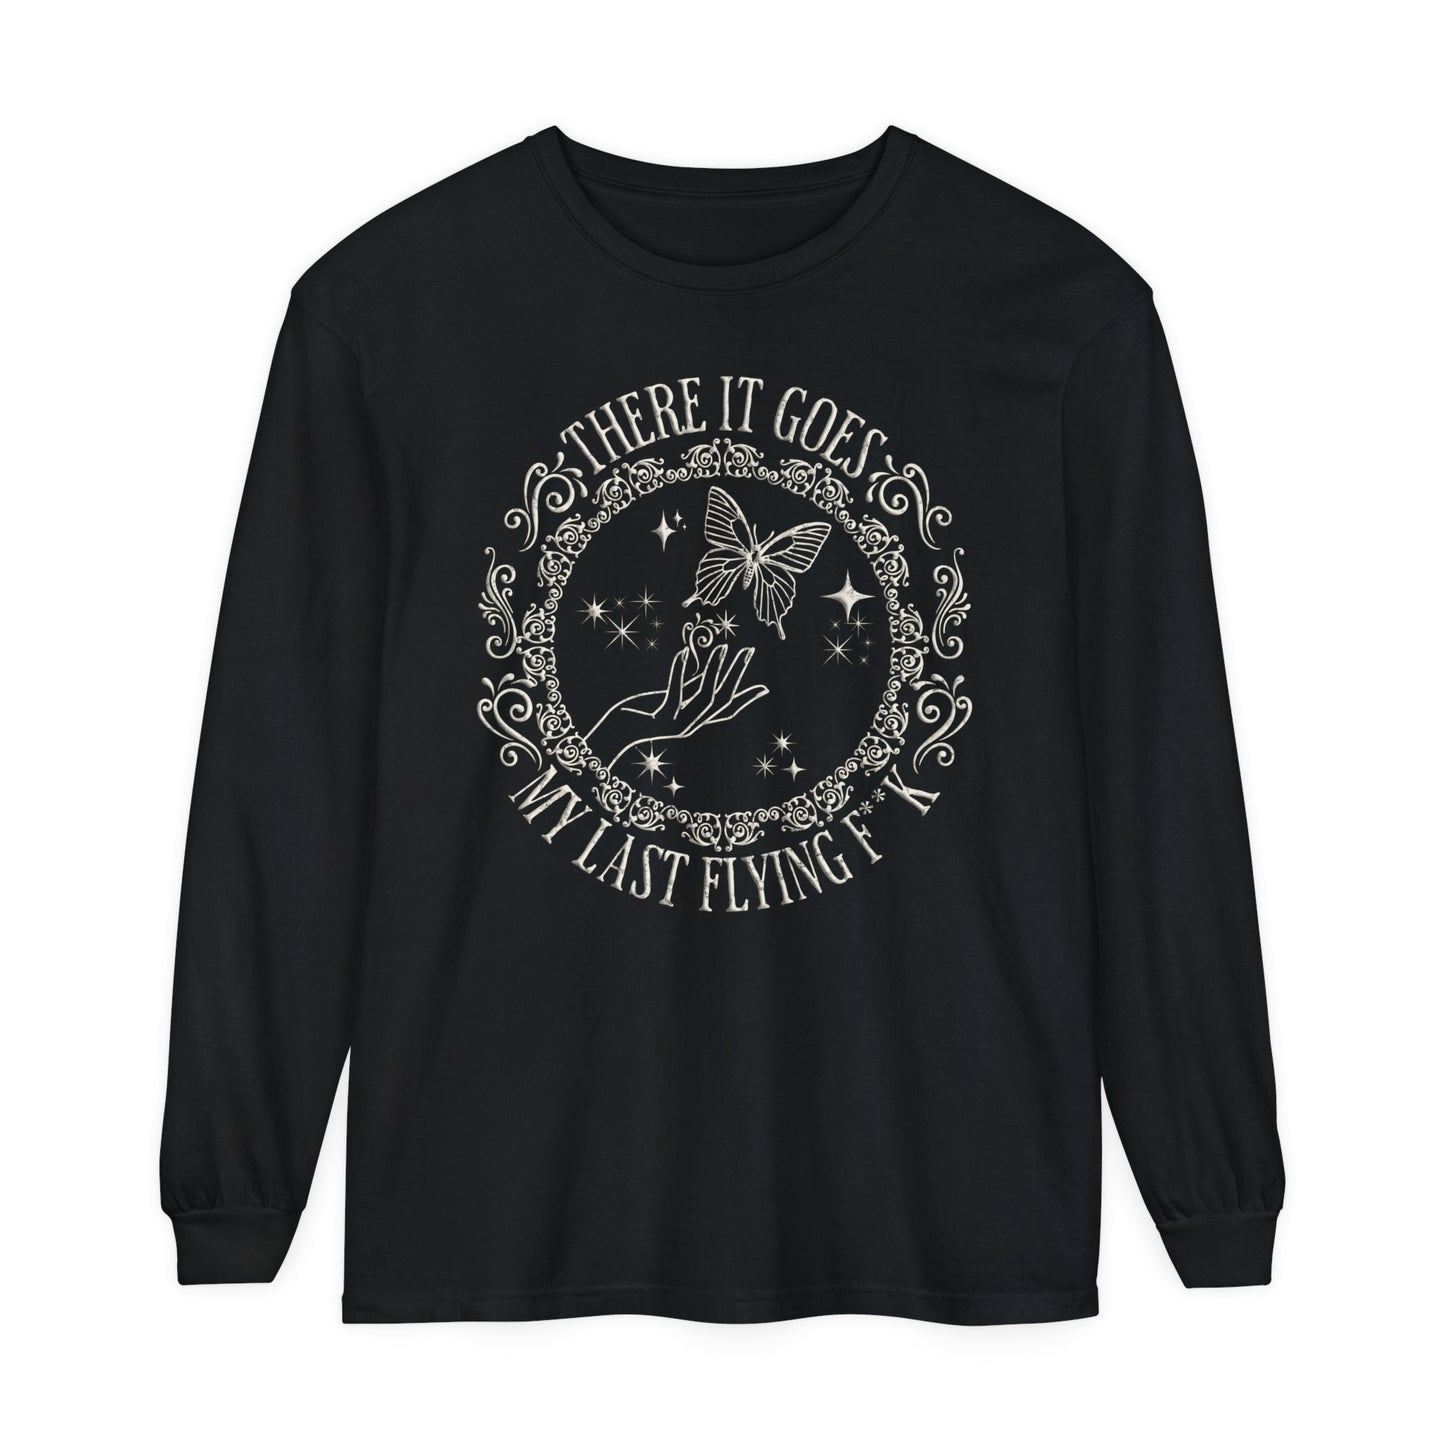 Adult "There It Goes-- My Last Flying F**k" Unisex Long Sleeve T-Shirt